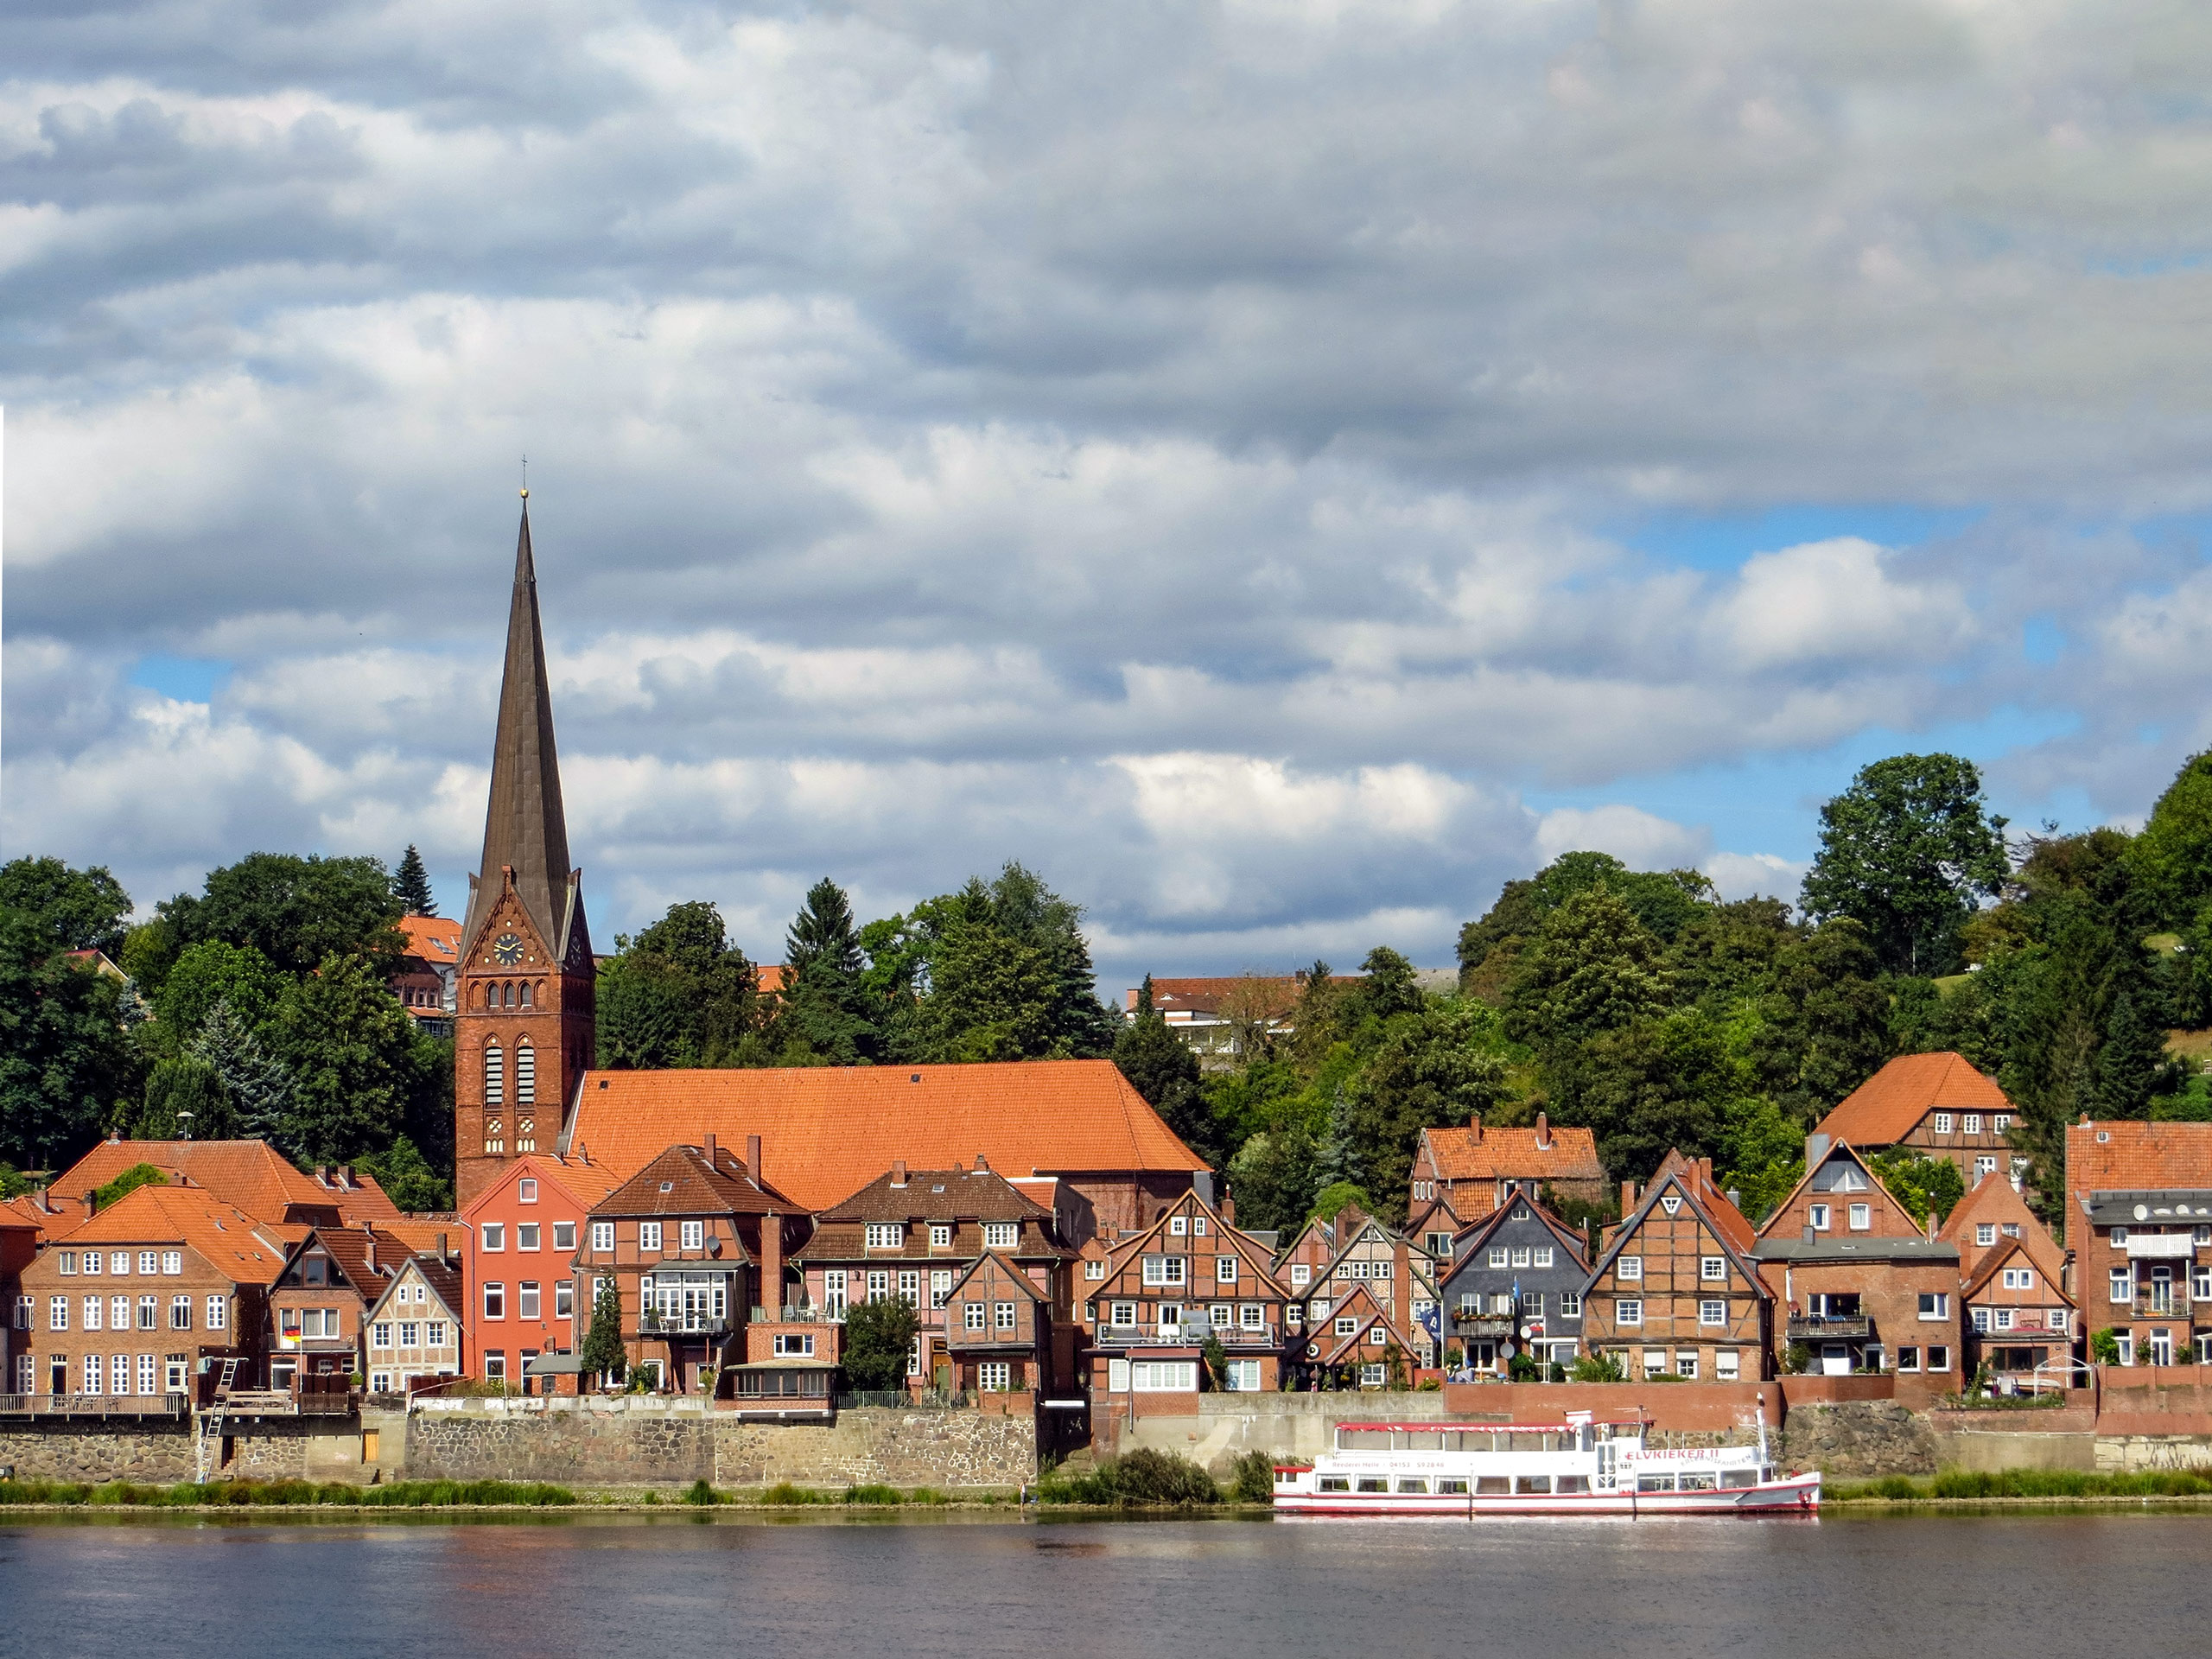 Lauenburg old shipping town historic buildings by the river